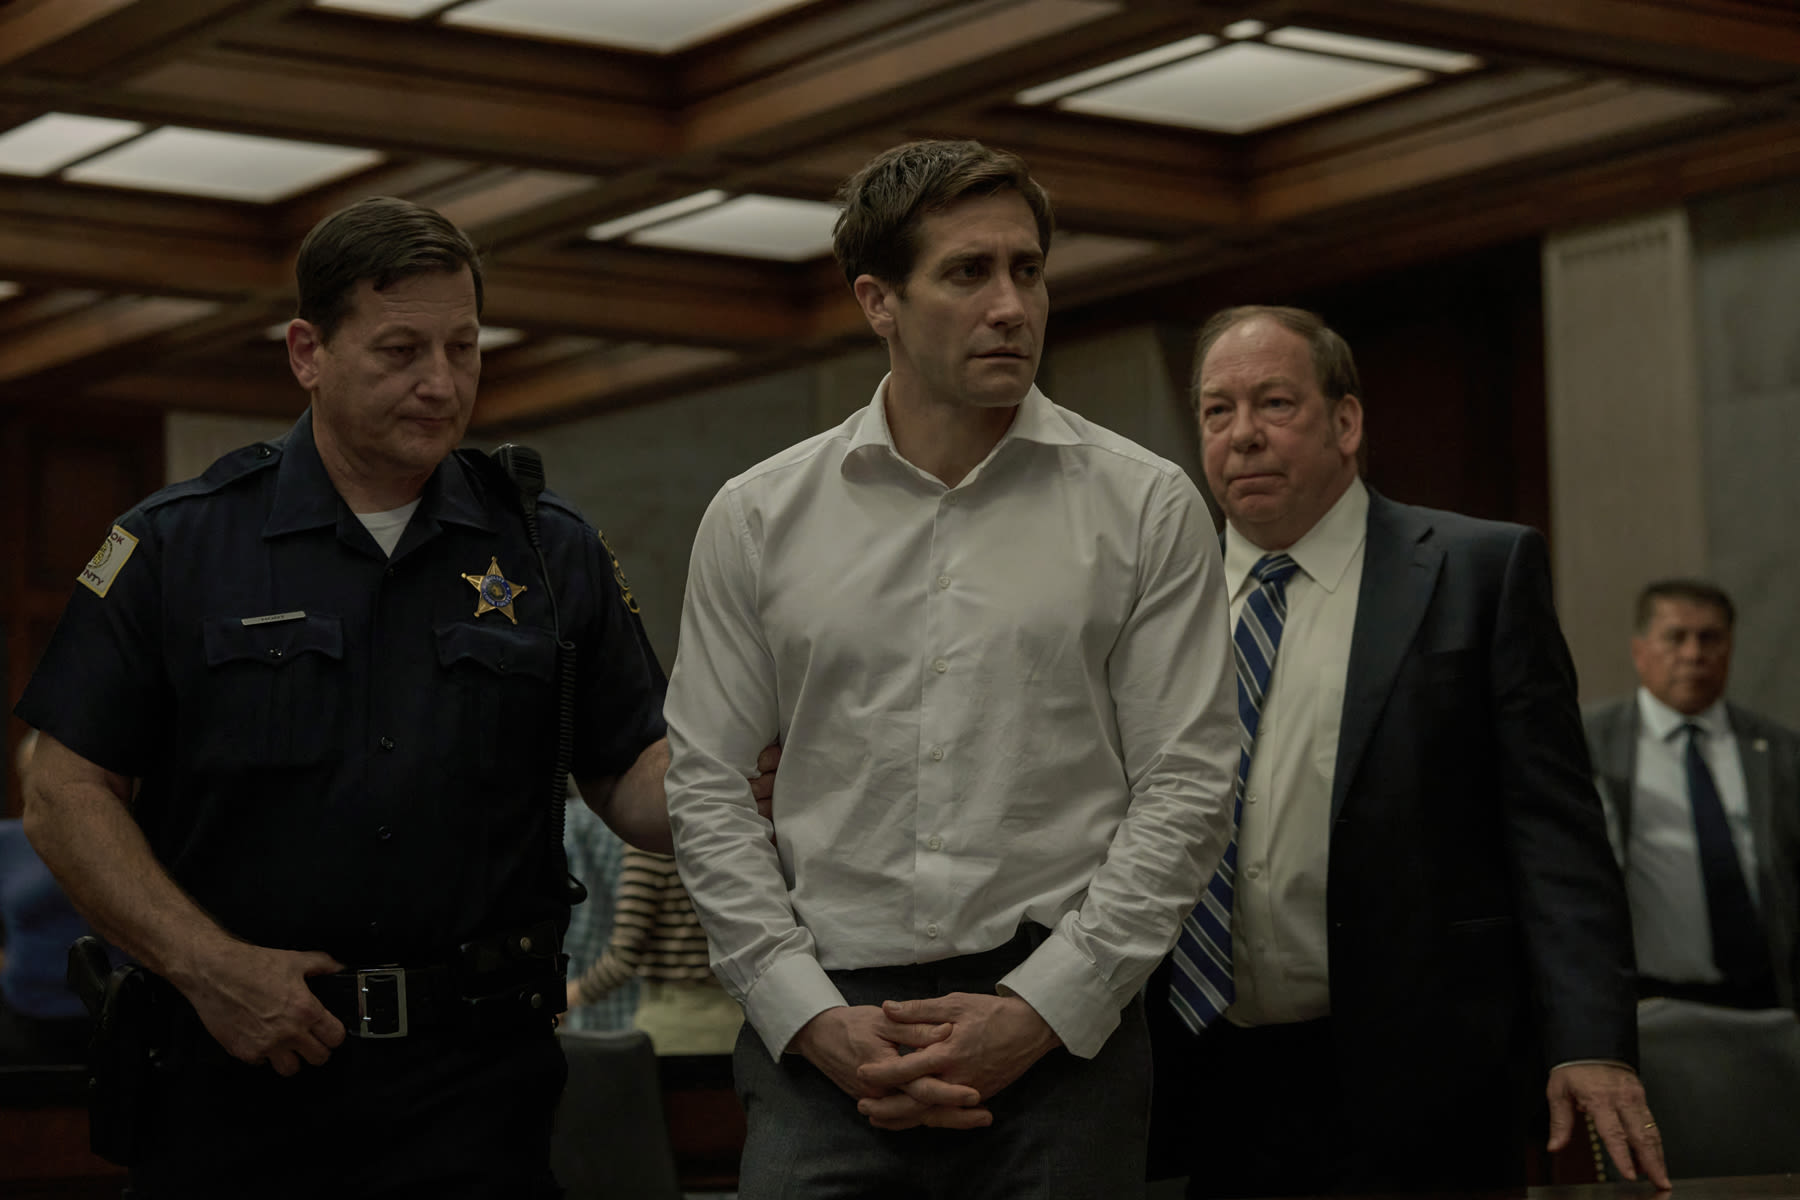 Jake Gyllenhaal Is ‘Presumed Innocent’ and Surely Didn’t Kill Her in New Series Trailer